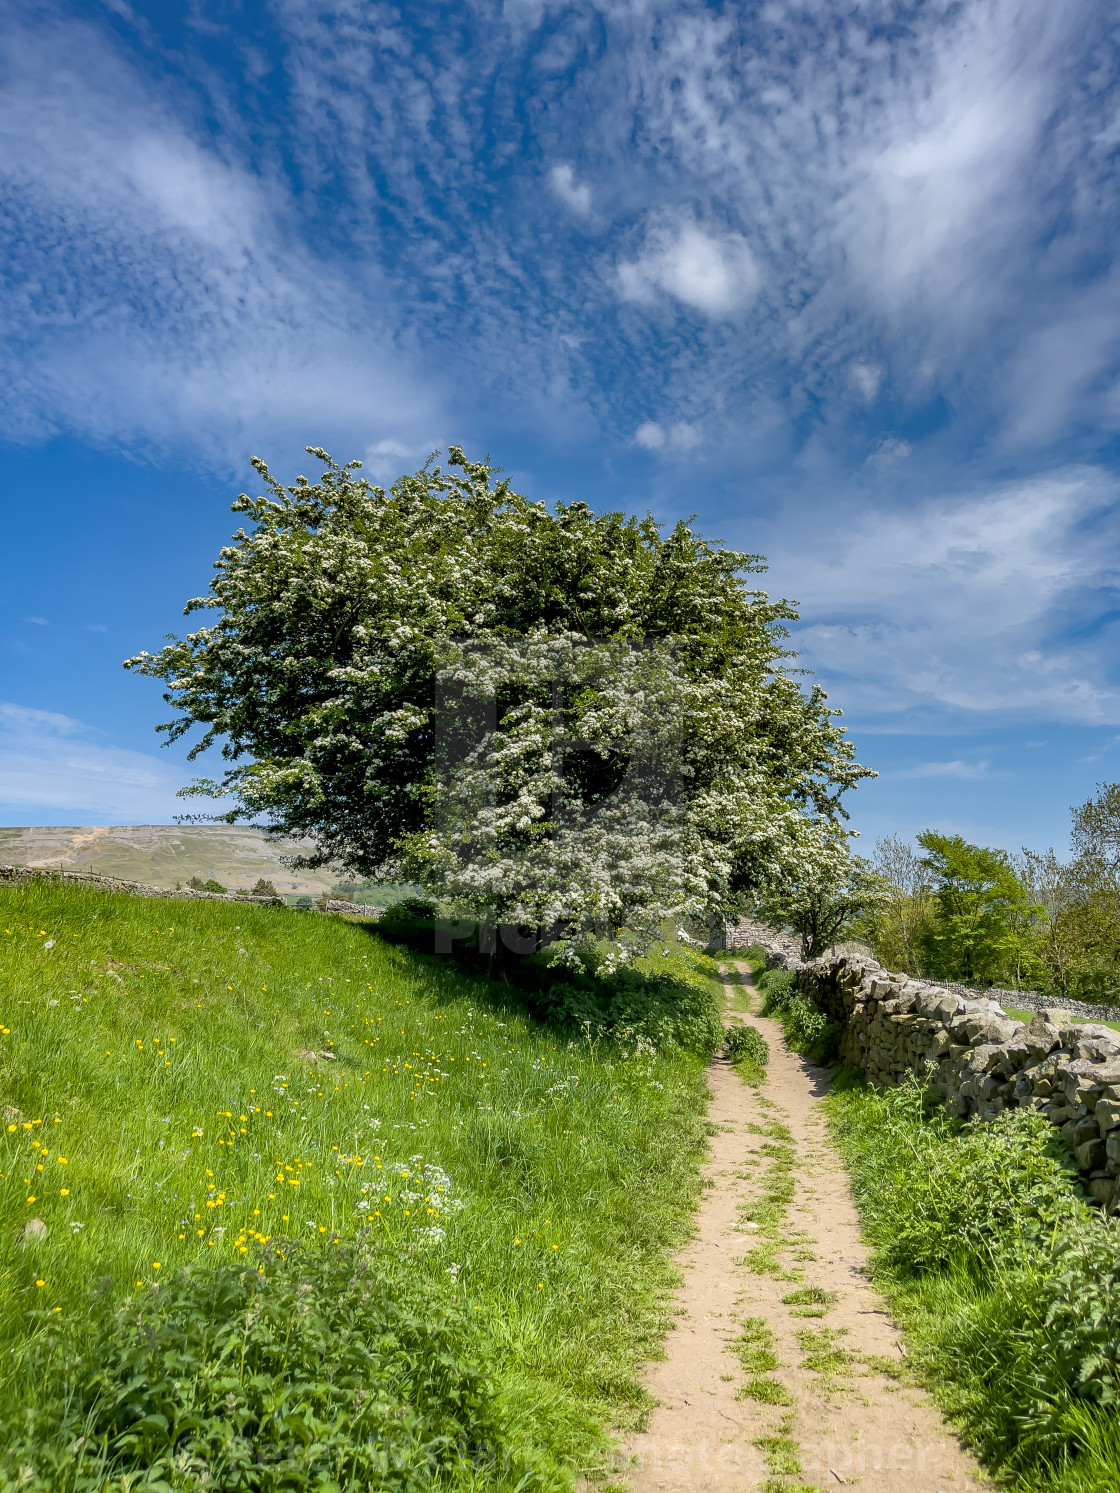 "Swaledale Wild Flower Meadow and Footpath near Reeth." stock image